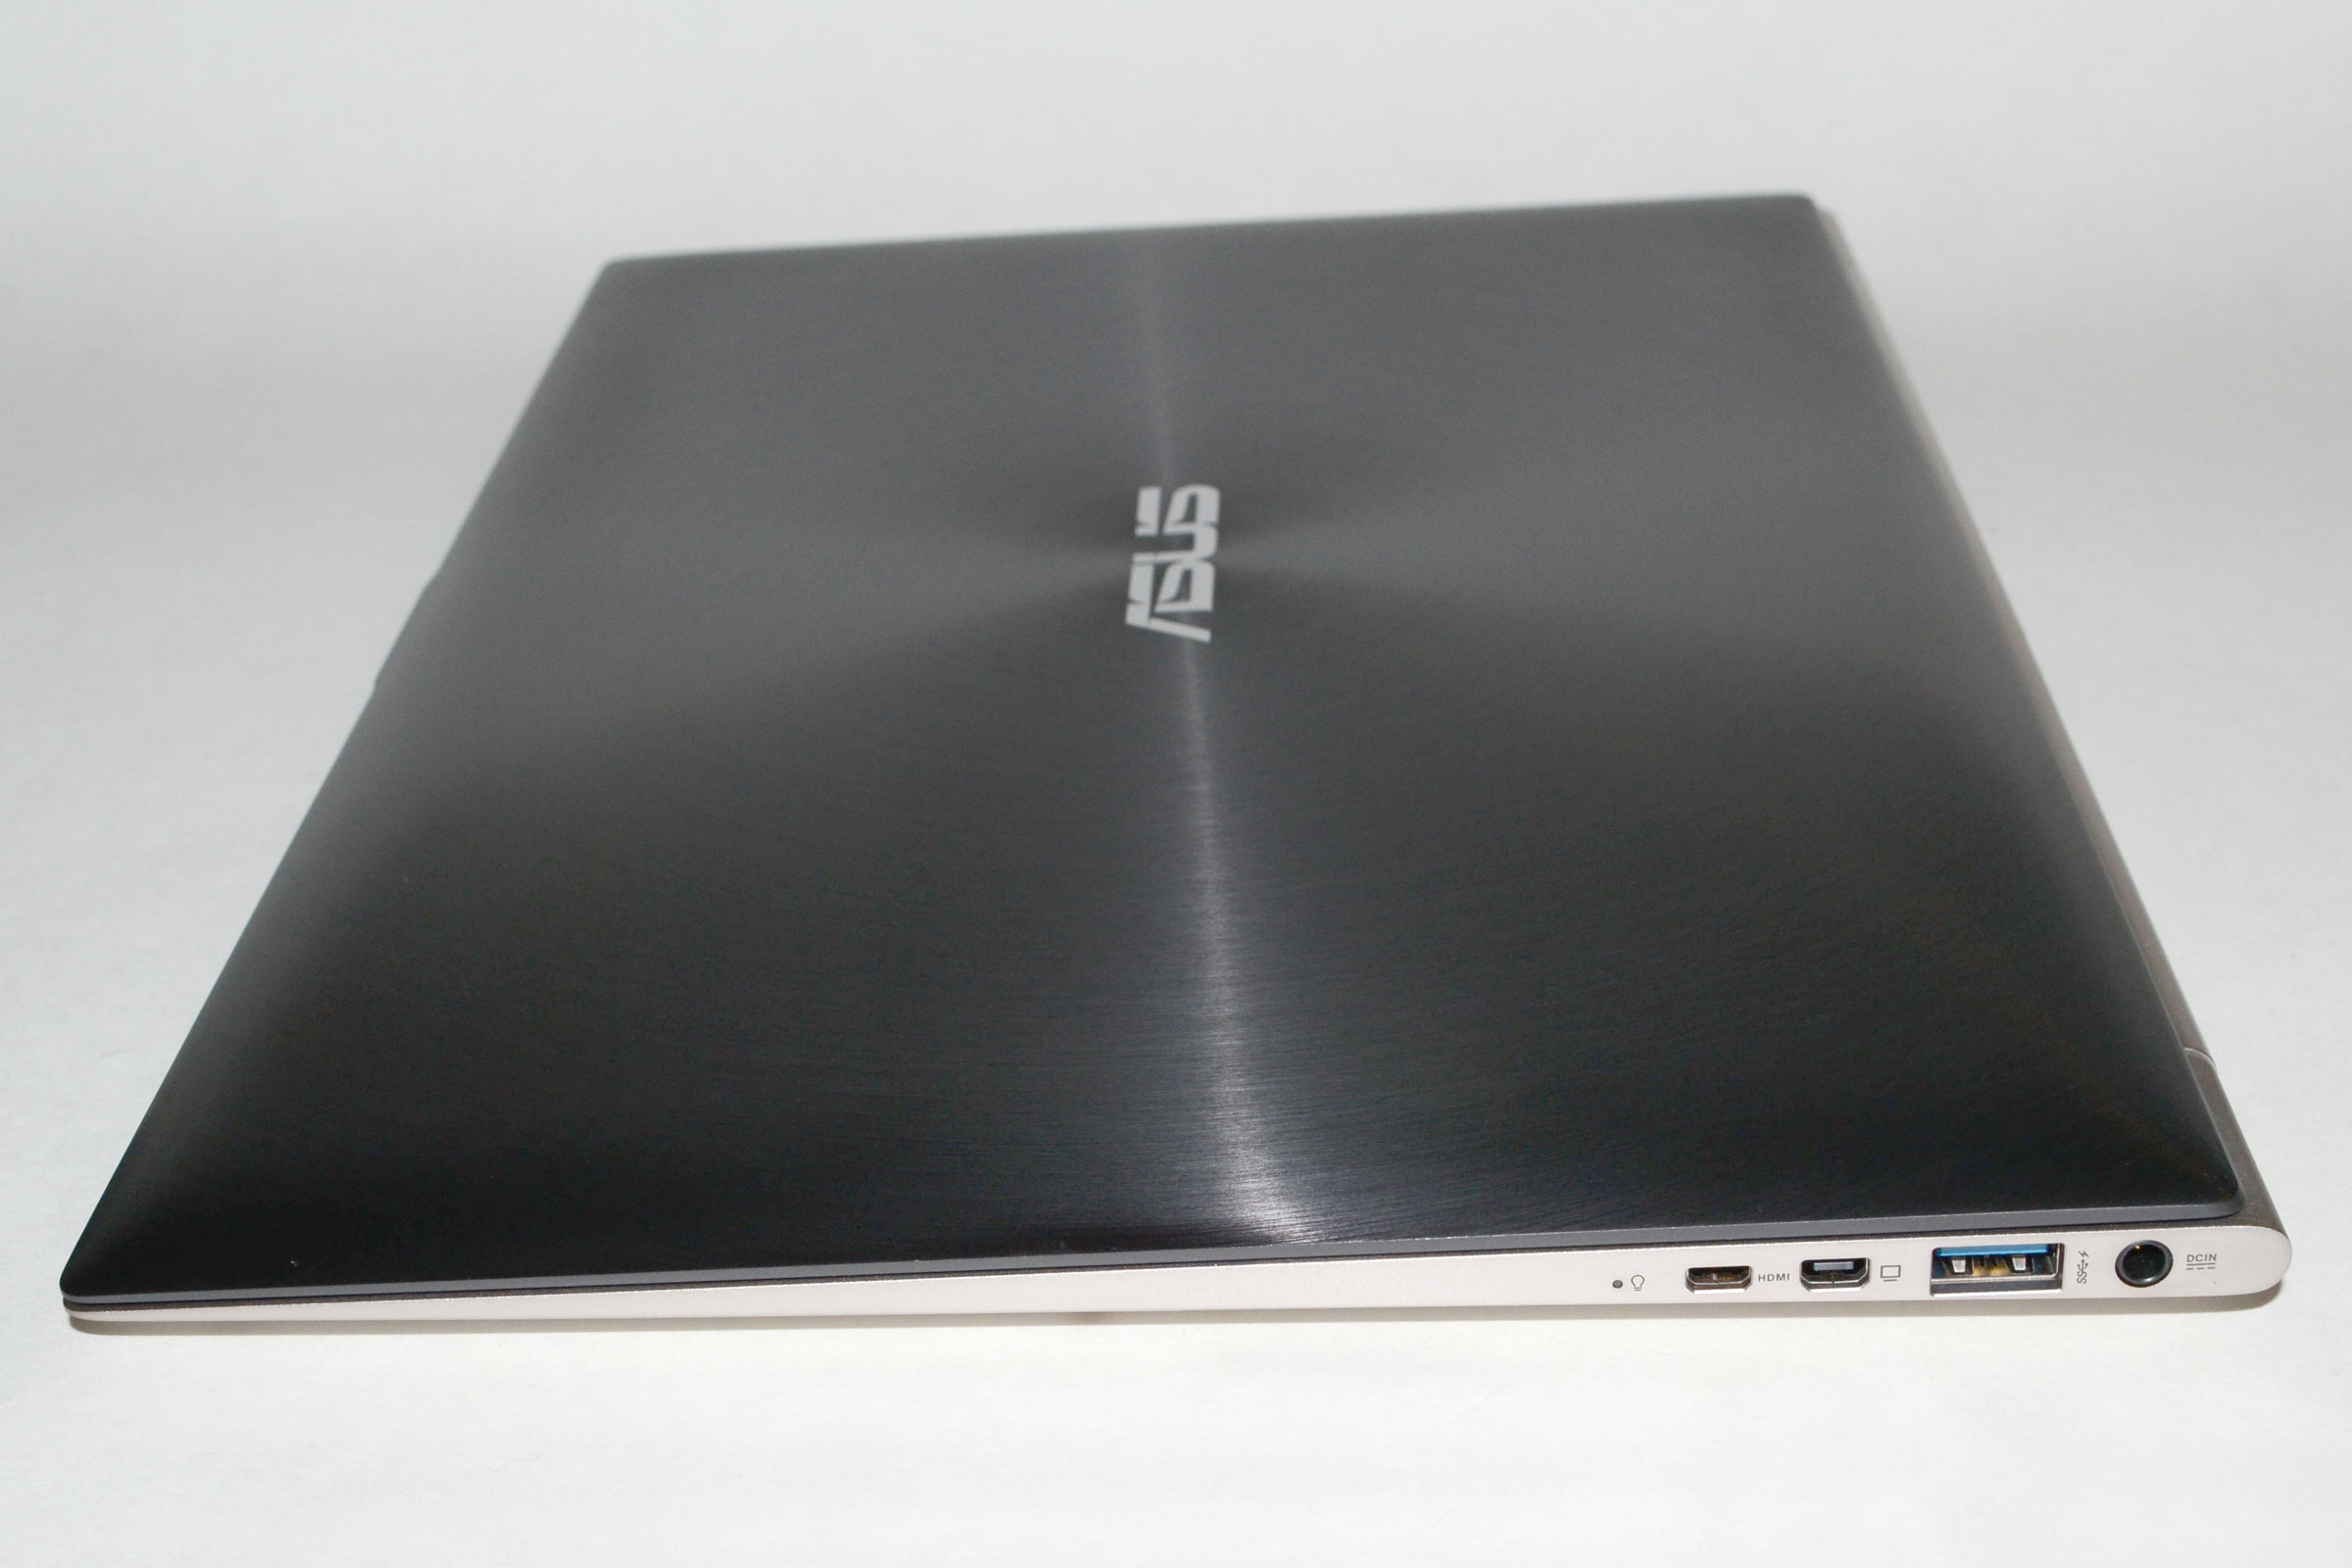 ASUS UX31A: Putting the Ultra in Ultrabooks